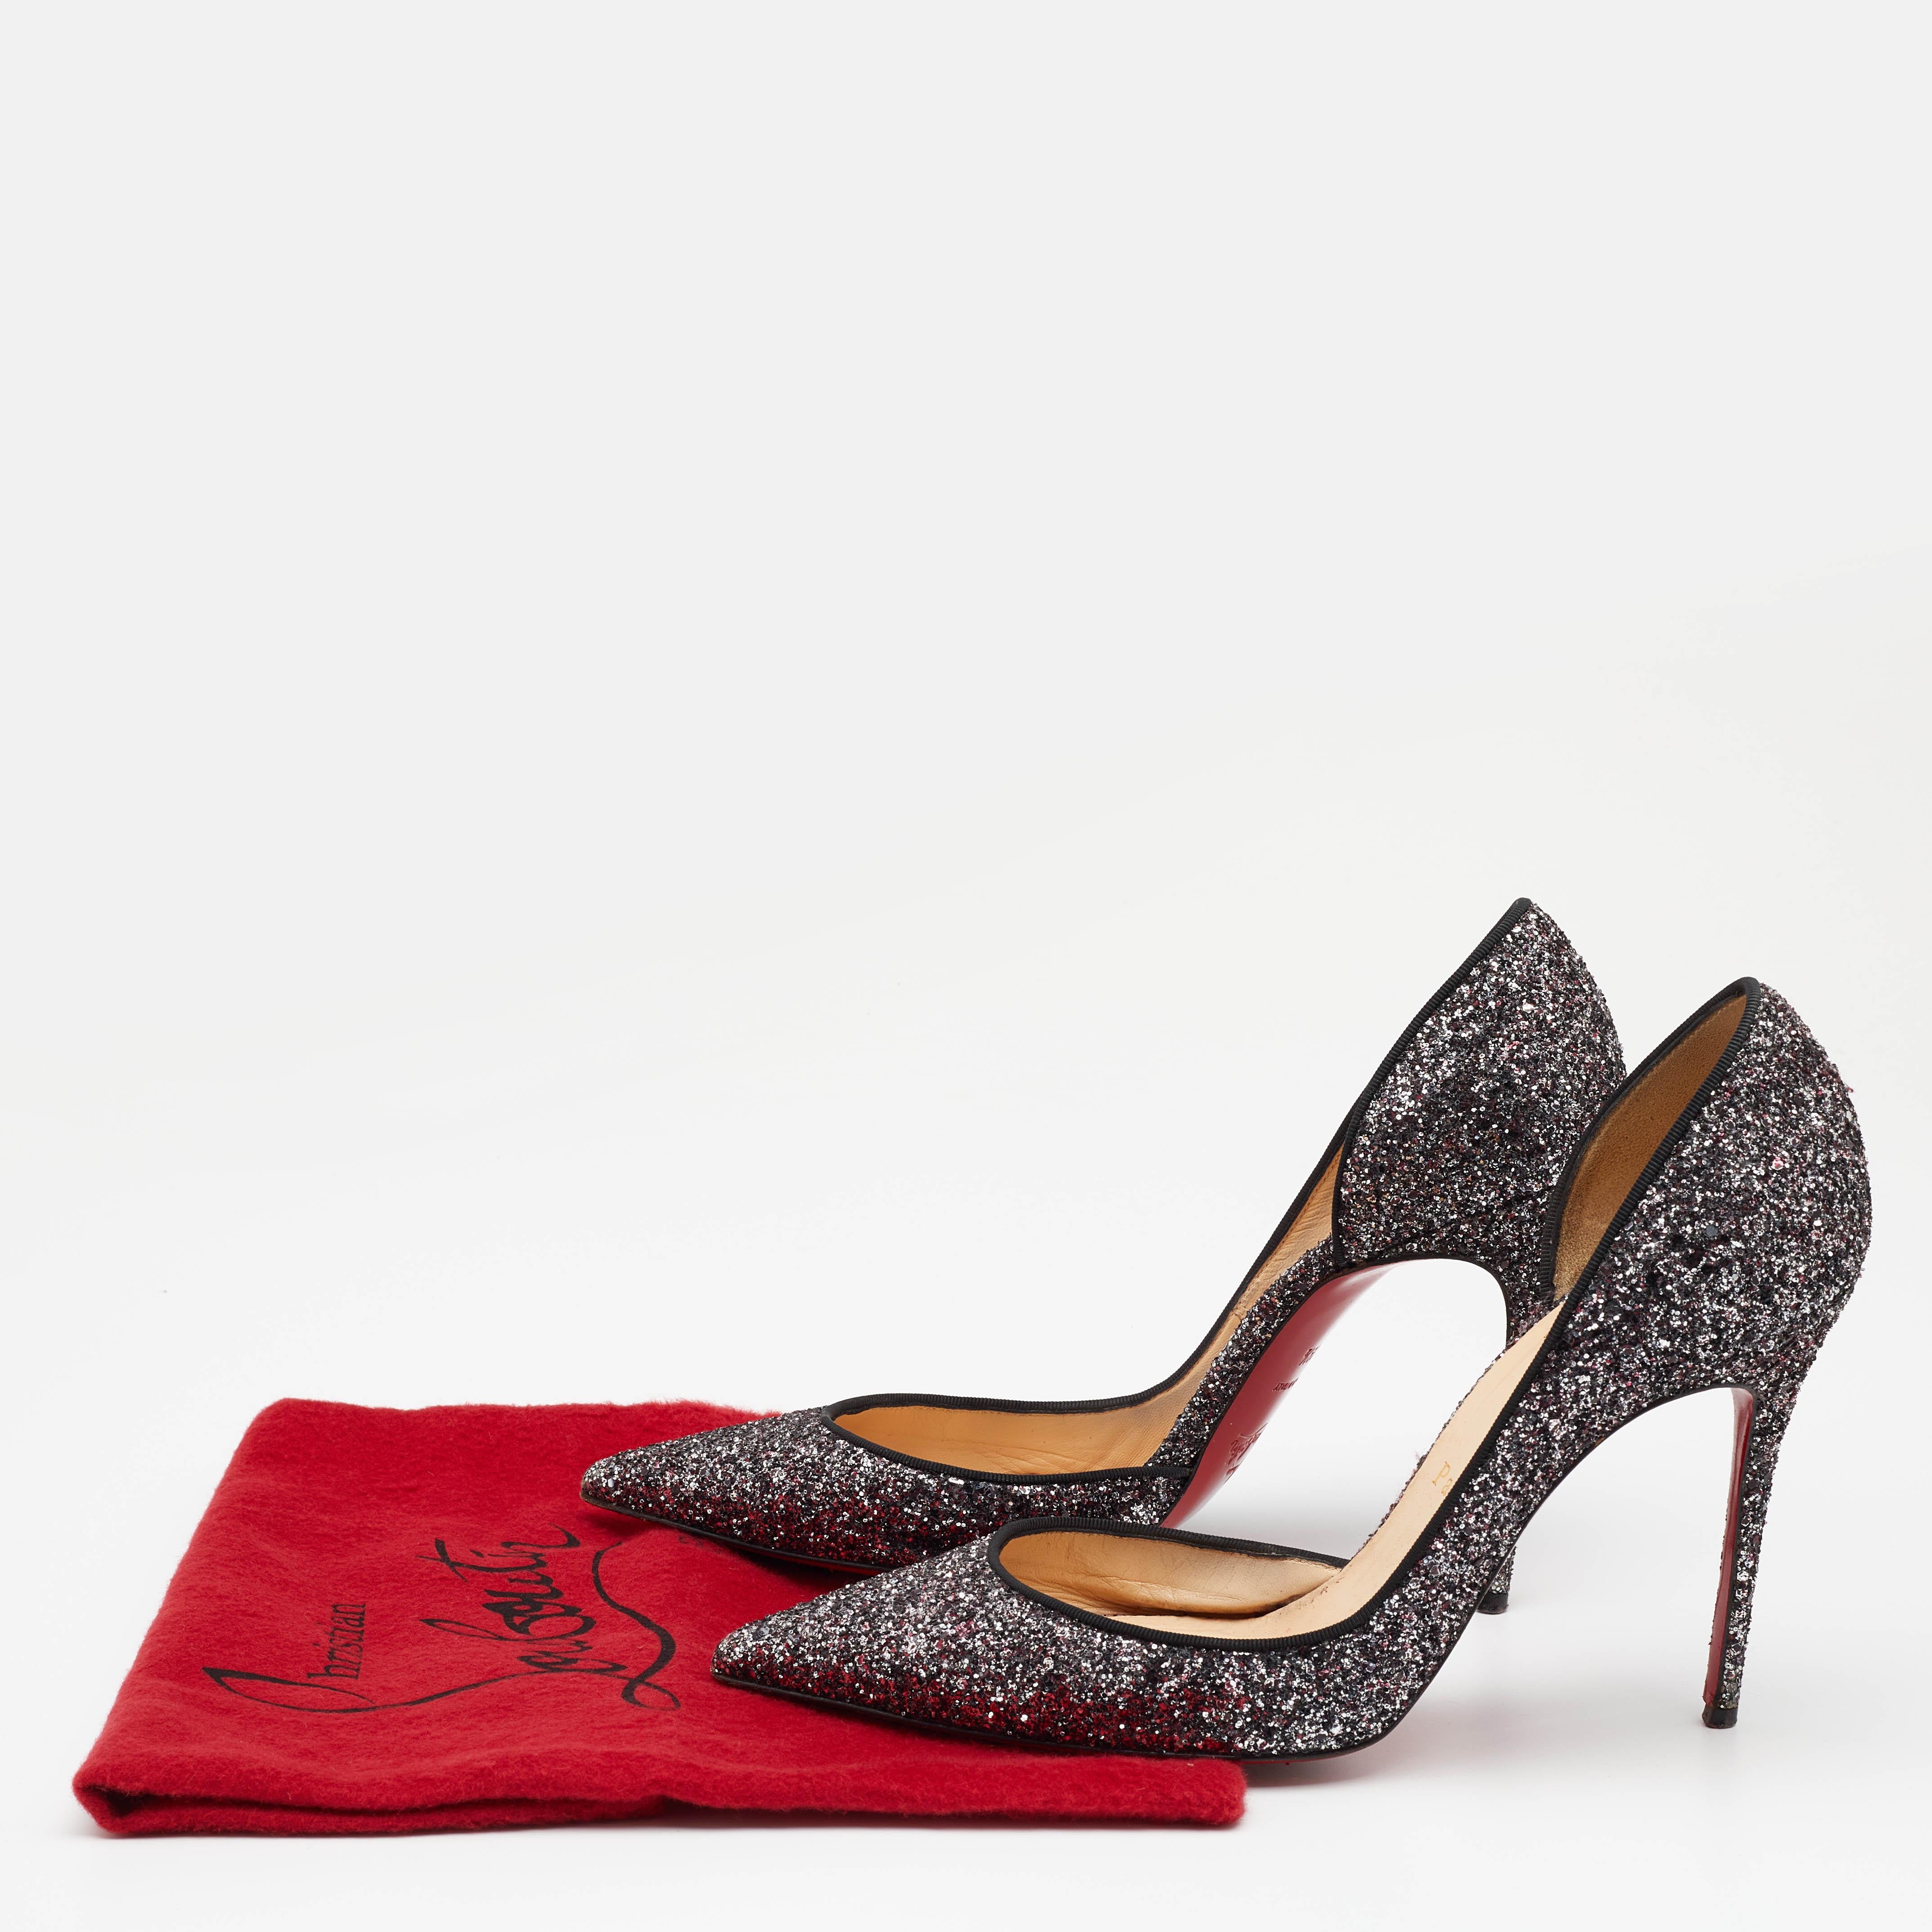 Christian Louboutin Black Glitter Iriza Pointed Toe D'orsay Pumps Size 39.5 For Sale 4